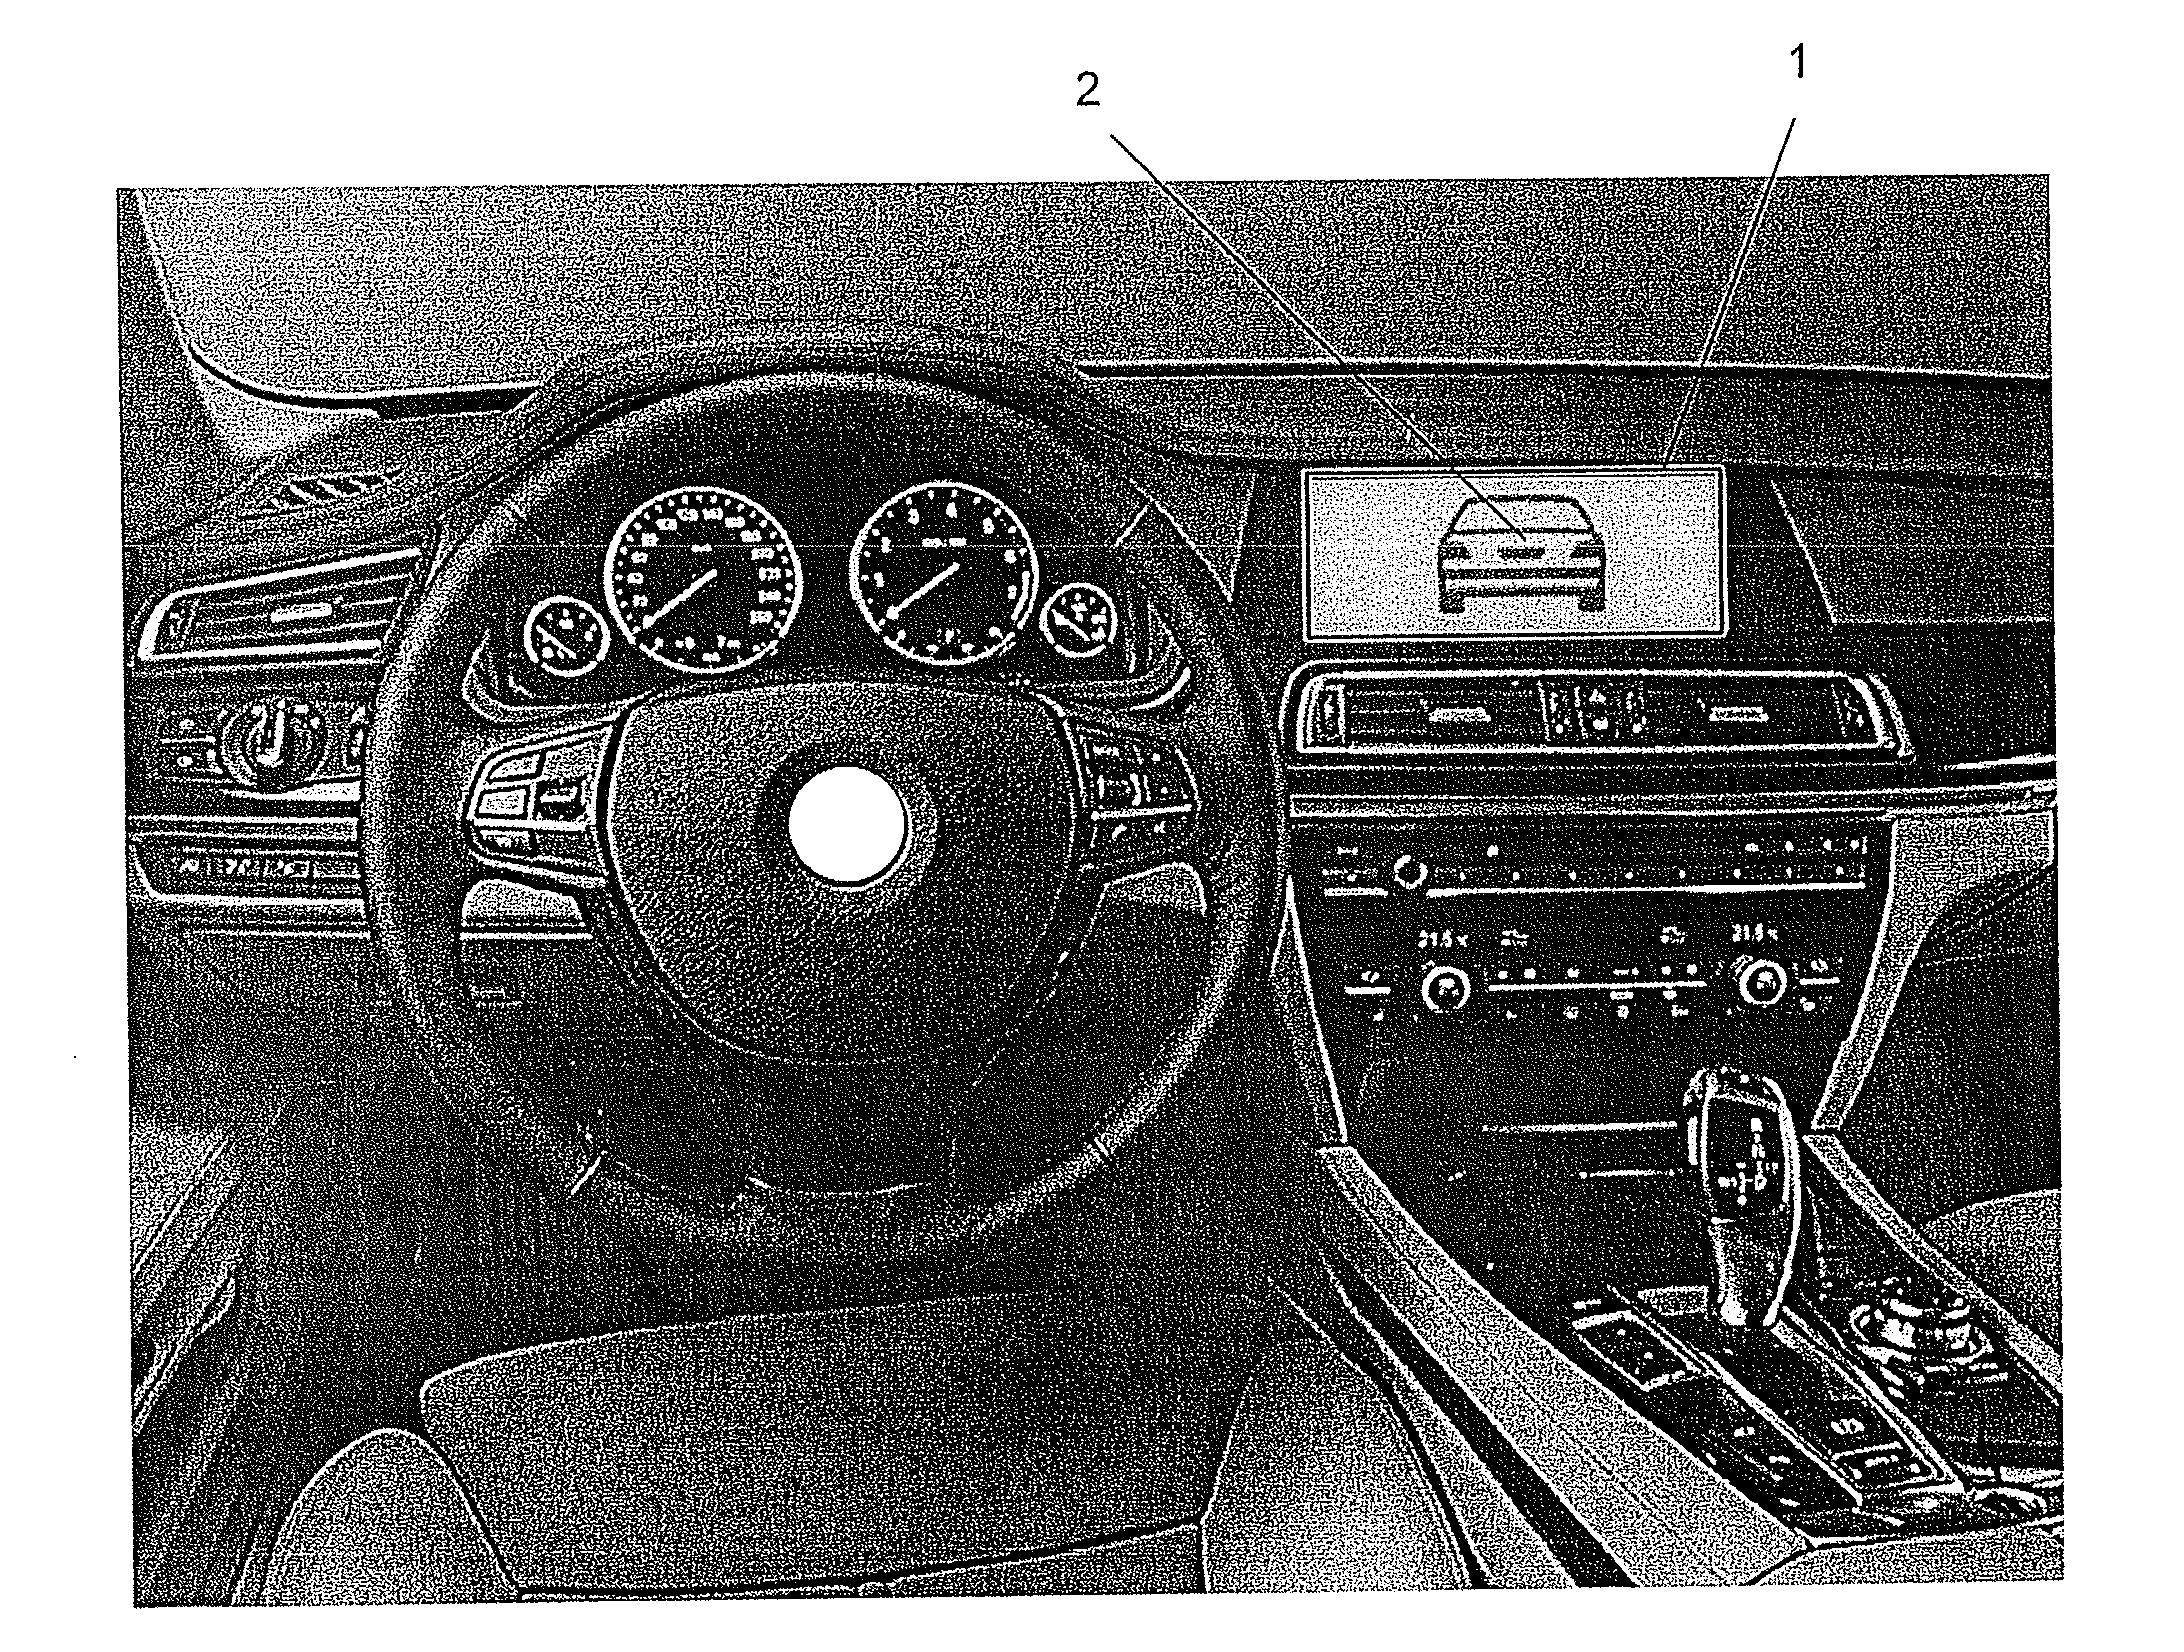 Motor Vehicle Having a Device for Influencing the Viewing Direction of the Driver